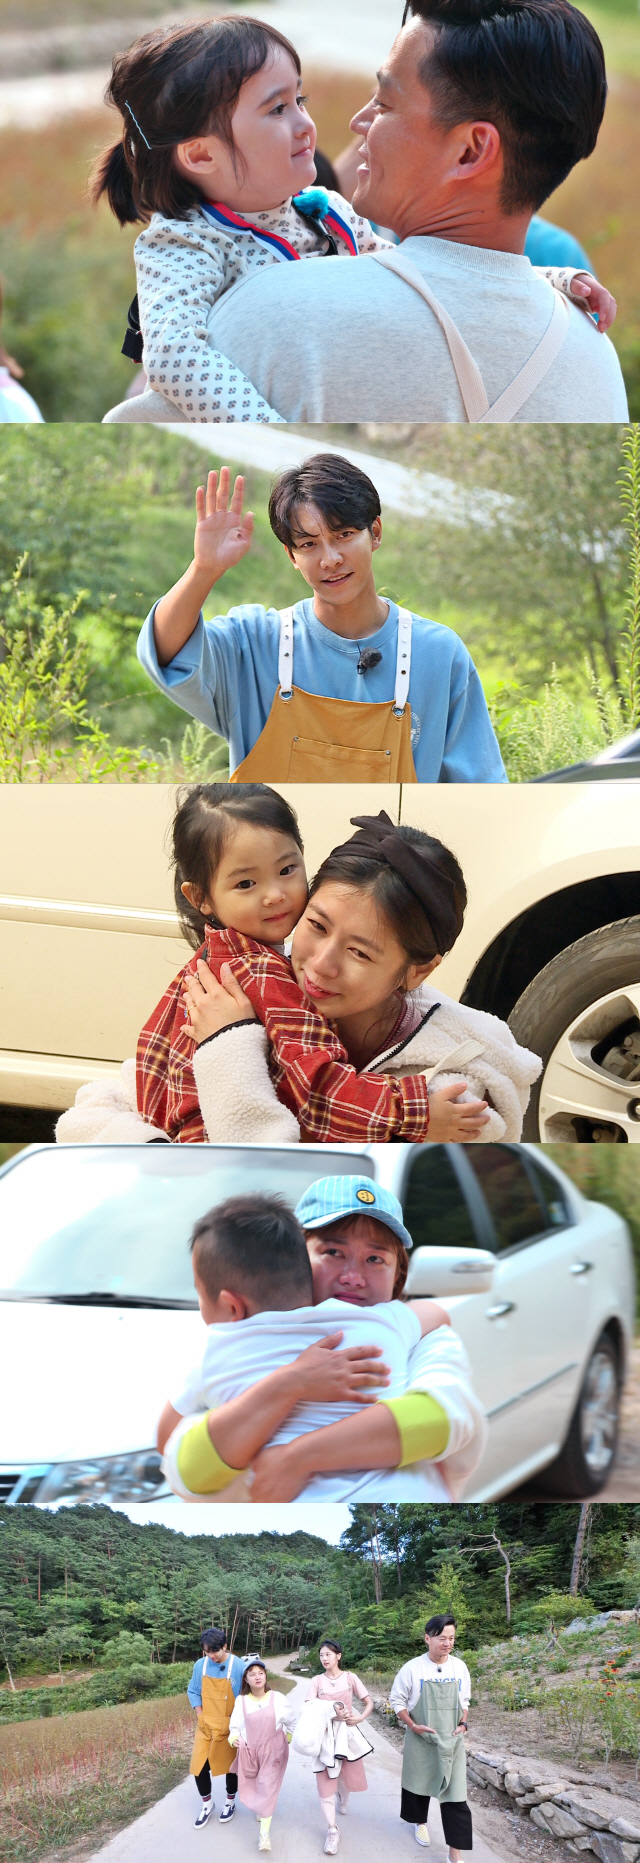 Little Forest Lee Seo-jin blushed in the eyeIn the final episode of SBSs Monday Entertainment Little Forest: Summer of the Blossom (hereinafter referred to as Little Forest), which airs tonight (Seventh), the fond farewells of Lee Seo-jin, Lee Seung-gi, Park Na-rae, Jung So-min, four members and Little will be revealed.Little Forest, which had a big talk with its first terrestrial entertainment and a spectacular lineup called Lee Seo-jin X Lee Seung-gi X Park Na-rae X Jung So-min, ends the 16-part long-term episode after the broadcast today (7th).Recently, the members shared their last greetings with the little ones they had chosen.Jung So-min poured tears into Brookes words, I will be Little Forest Aunt when I grow up, and Park Na-rae, who had been tearing until the end, showed tears of regret and showed tears of regret. Lee Seung-gi, who pretended to be calm, also showed a stir.Finally, I have never seen tears in any broadcast in the meantime, said Lee Seo-jin, a Confessions Sosse Wit Nam, who also surprised everyone.Lee Seo-jin, who is the 21st year of his debut, is interested in why he was the first to cry.The farewell of Uncle Lee and Little can be confirmed at the final Little Forest which is broadcasted at 10 oclock tonight.